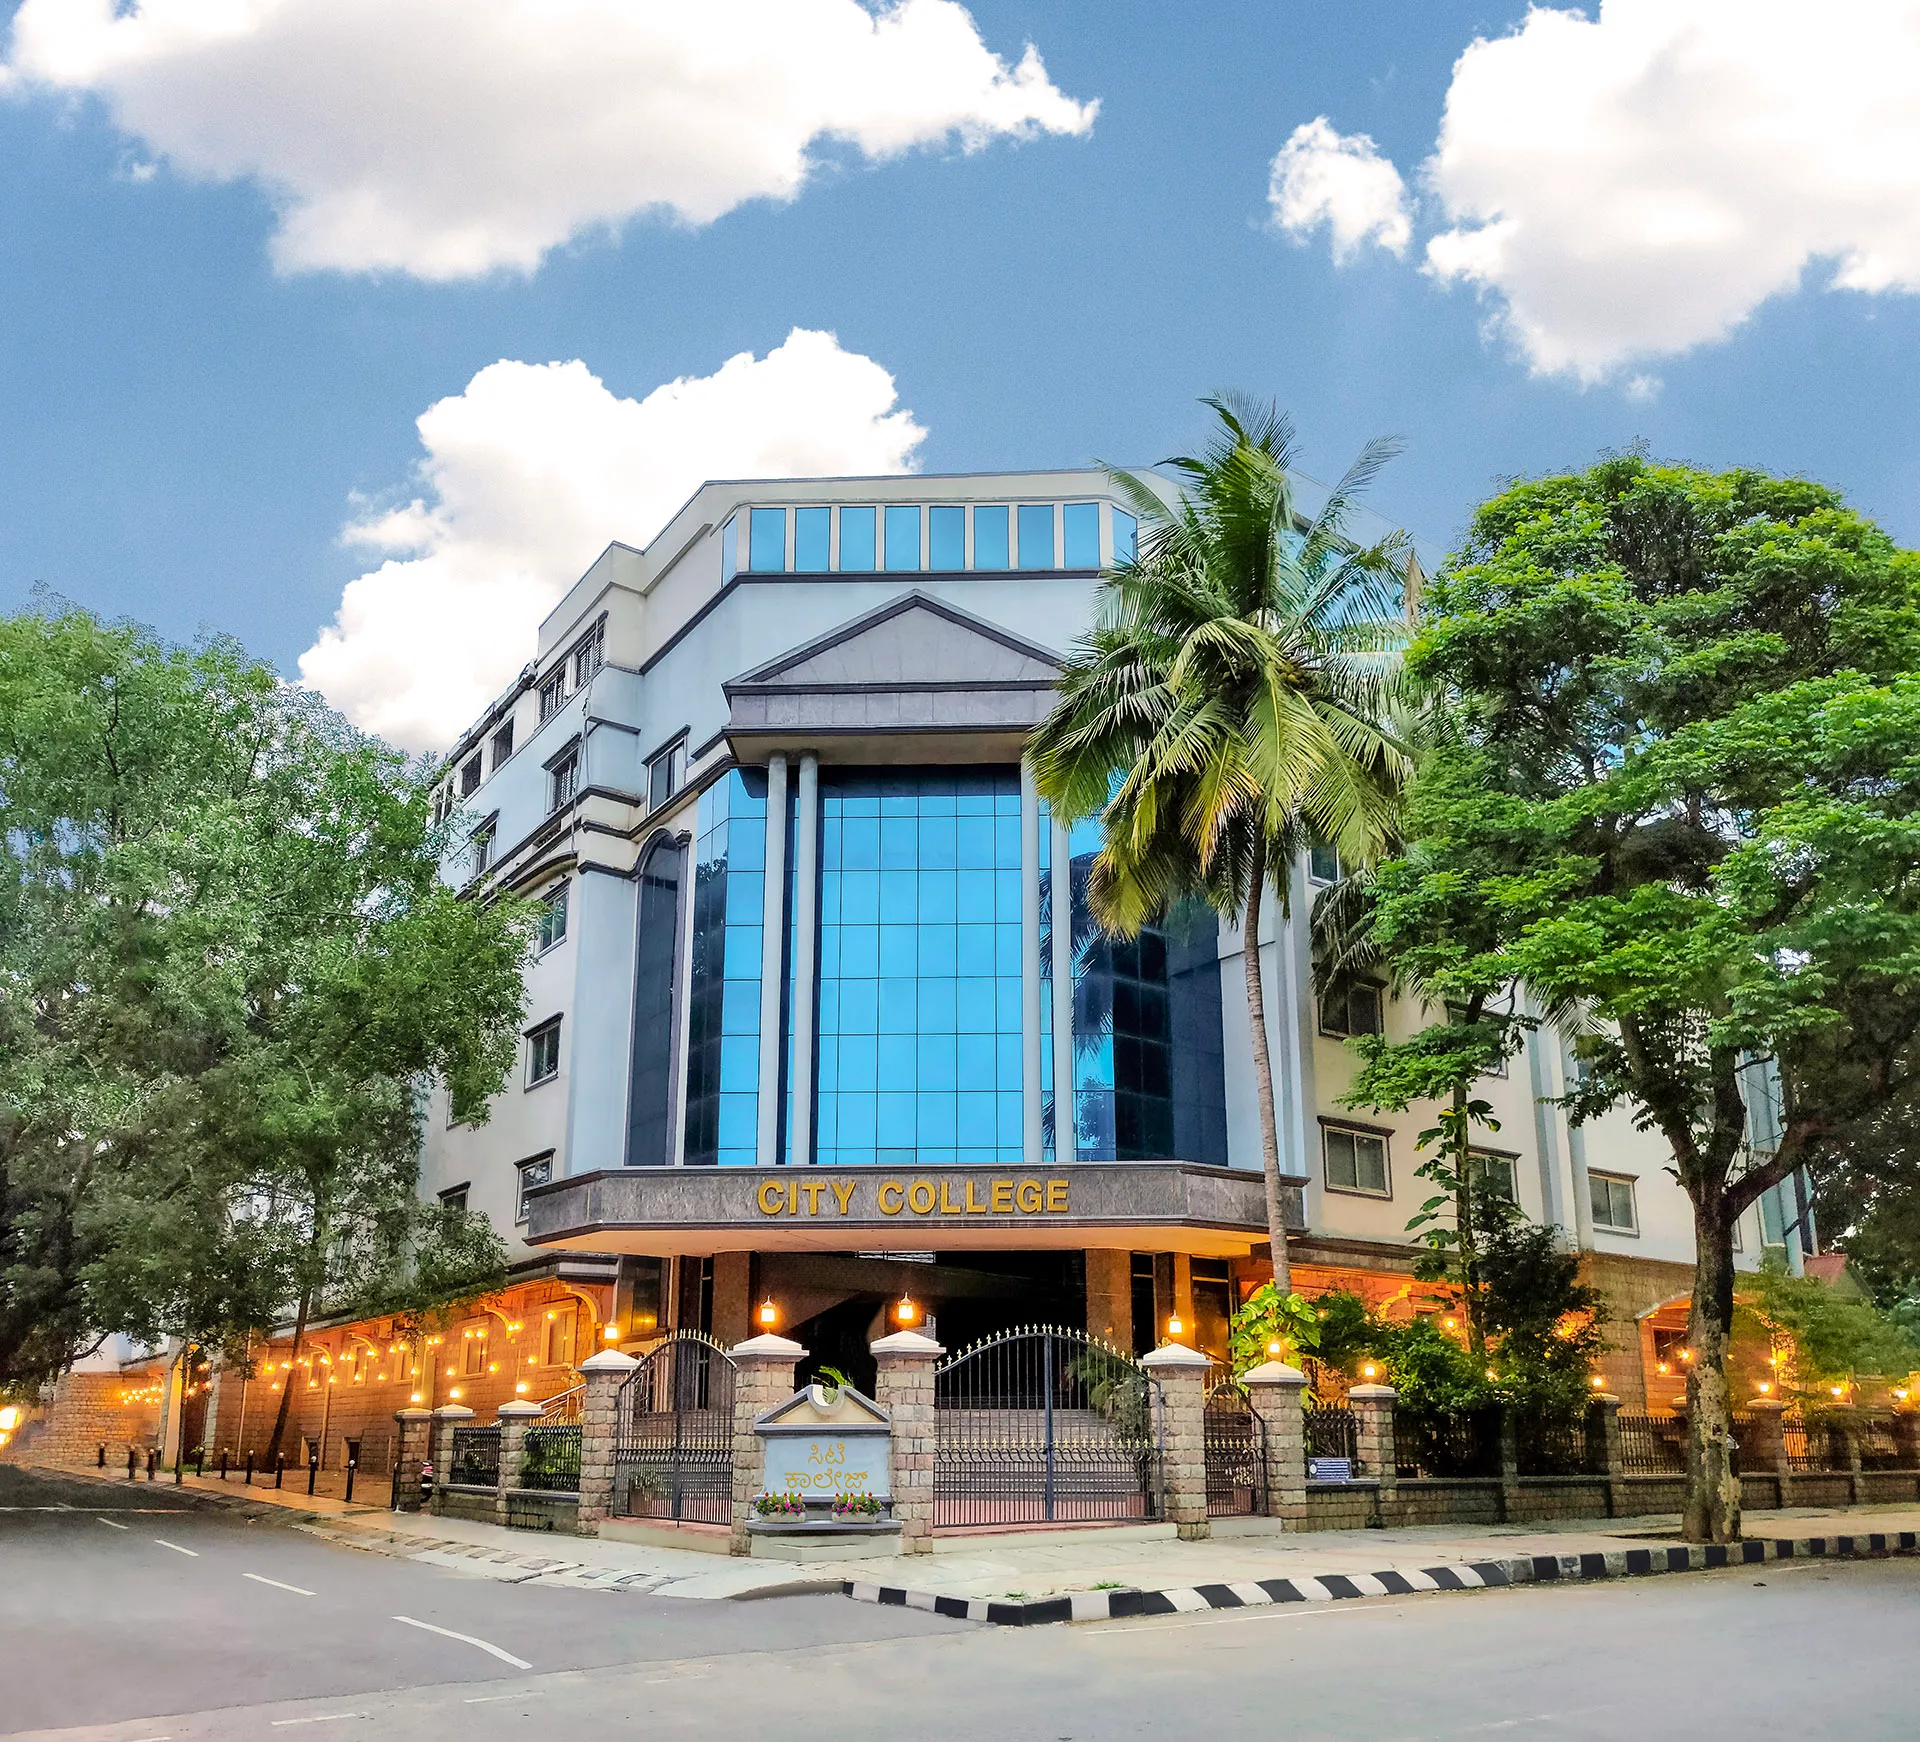 City College Jayanagar Bangalore Admission, Courses, Fees, Placements, Rankings, Facilities